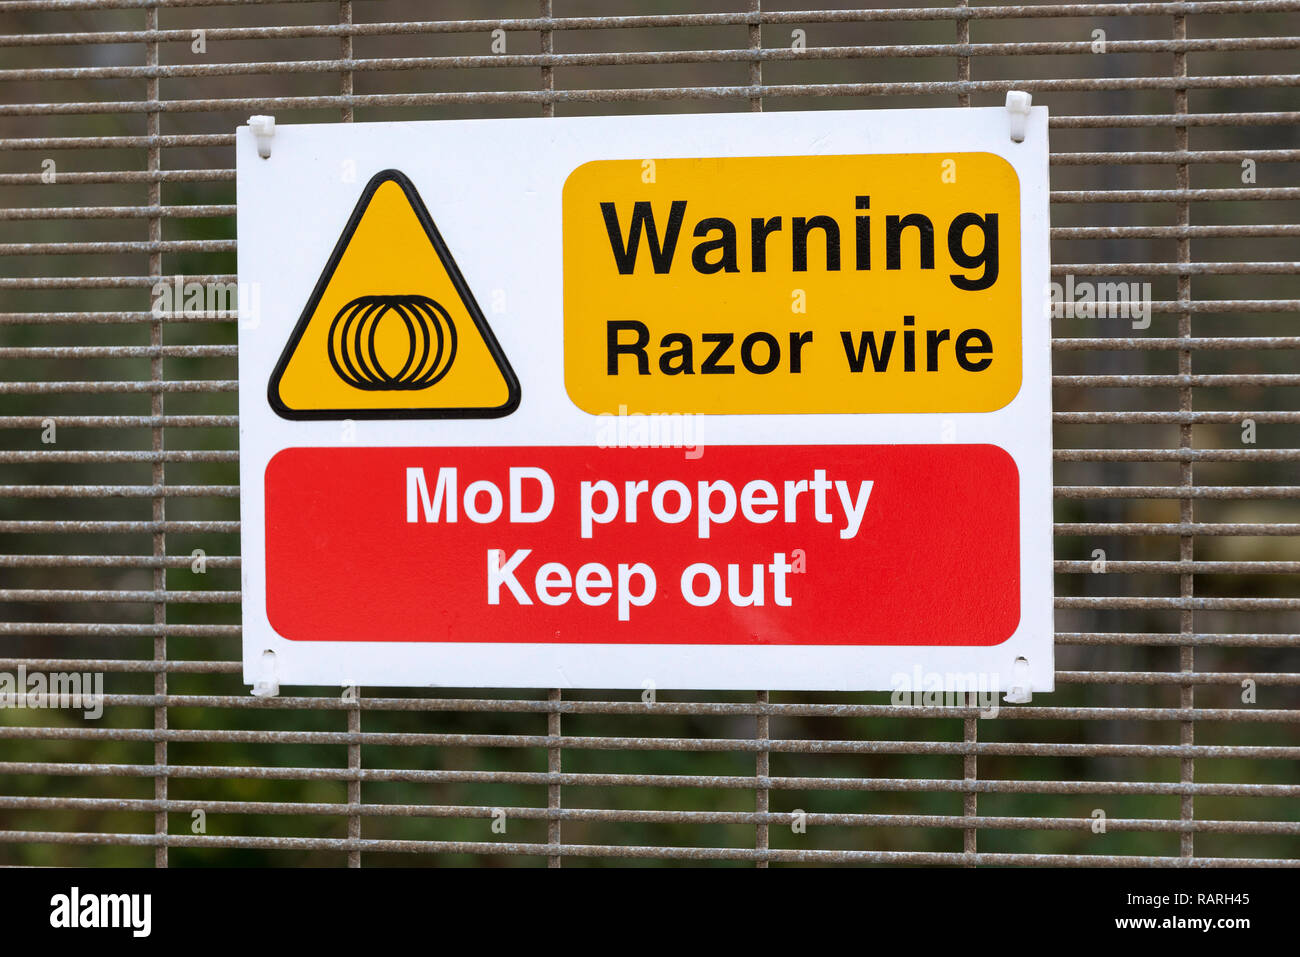 Instow, North Devon, England, UK. January 2019. Ministry of Defence warning sign of razor wire. Stock Photo